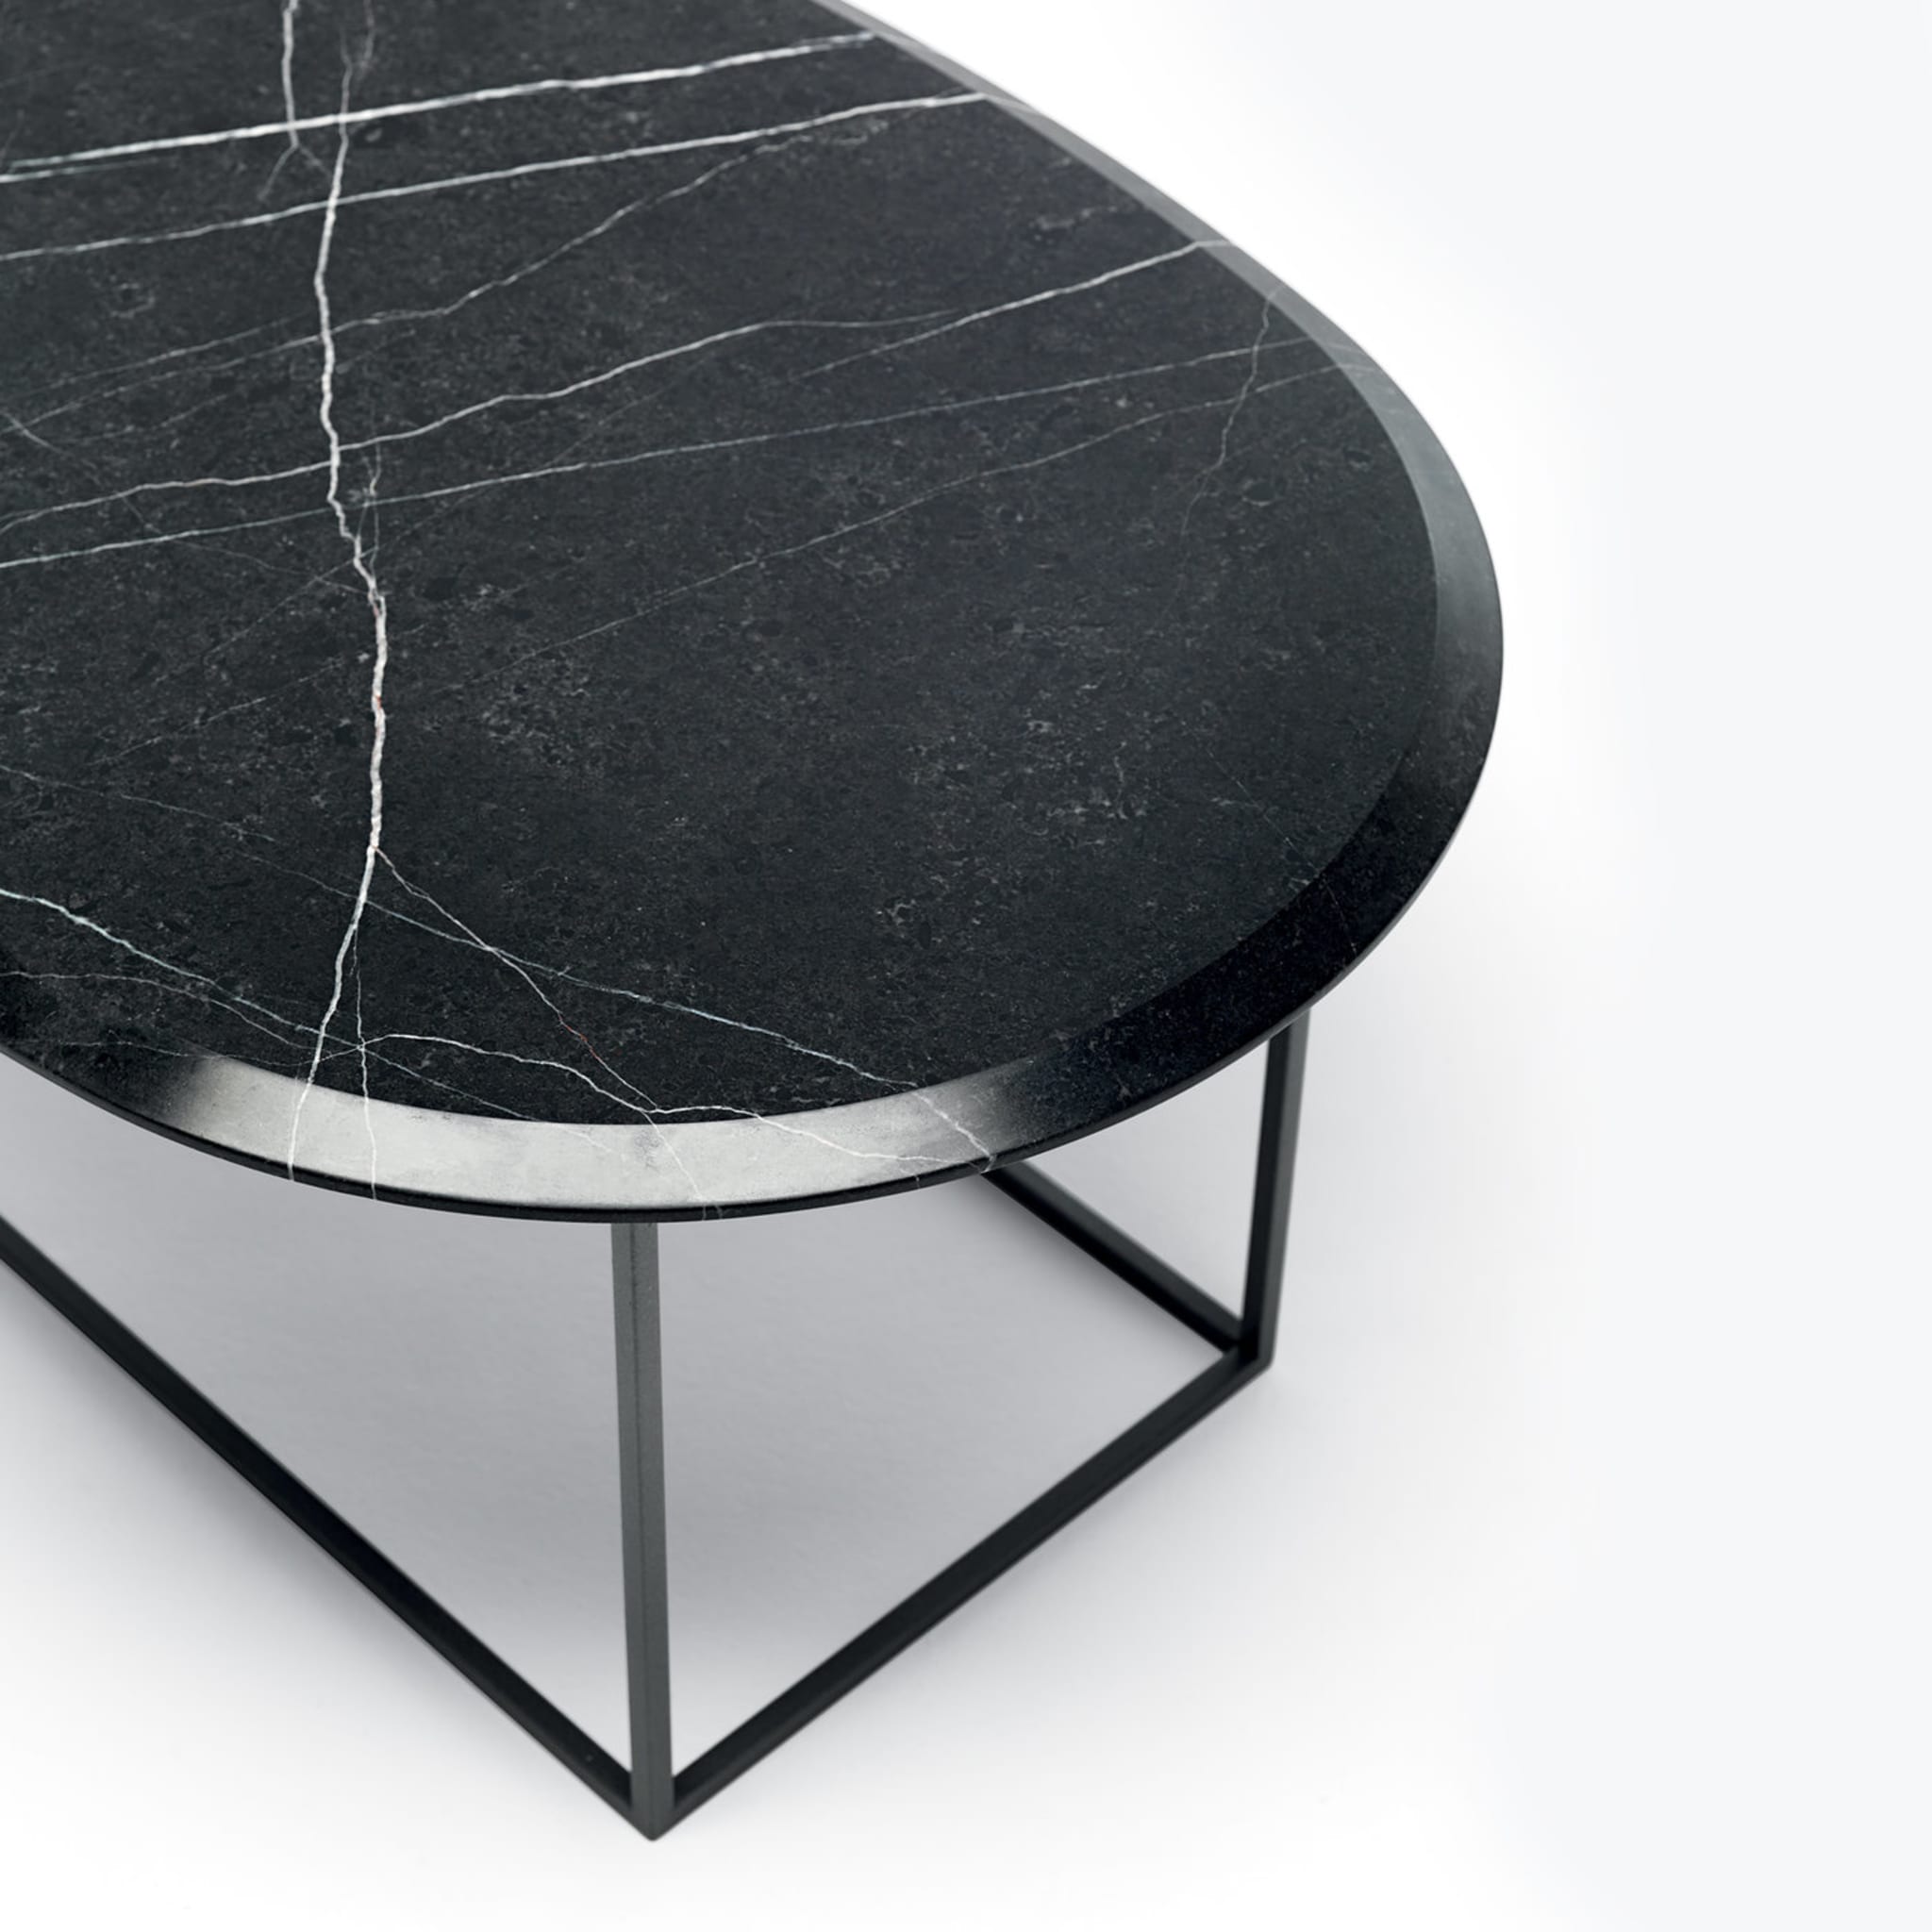 MT Low Coffee Table with New Saint Laurent Marble Top - Alternative view 1